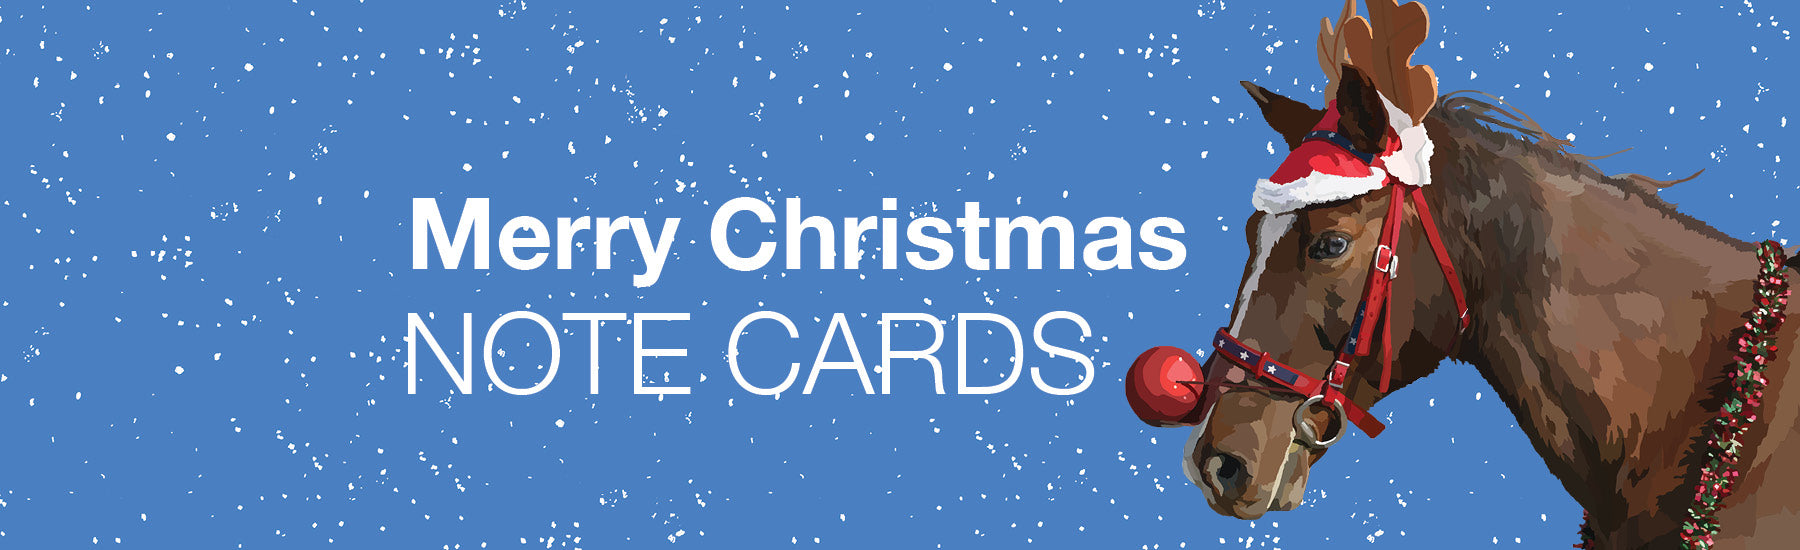 CHRISTMAS NOTE CARDS